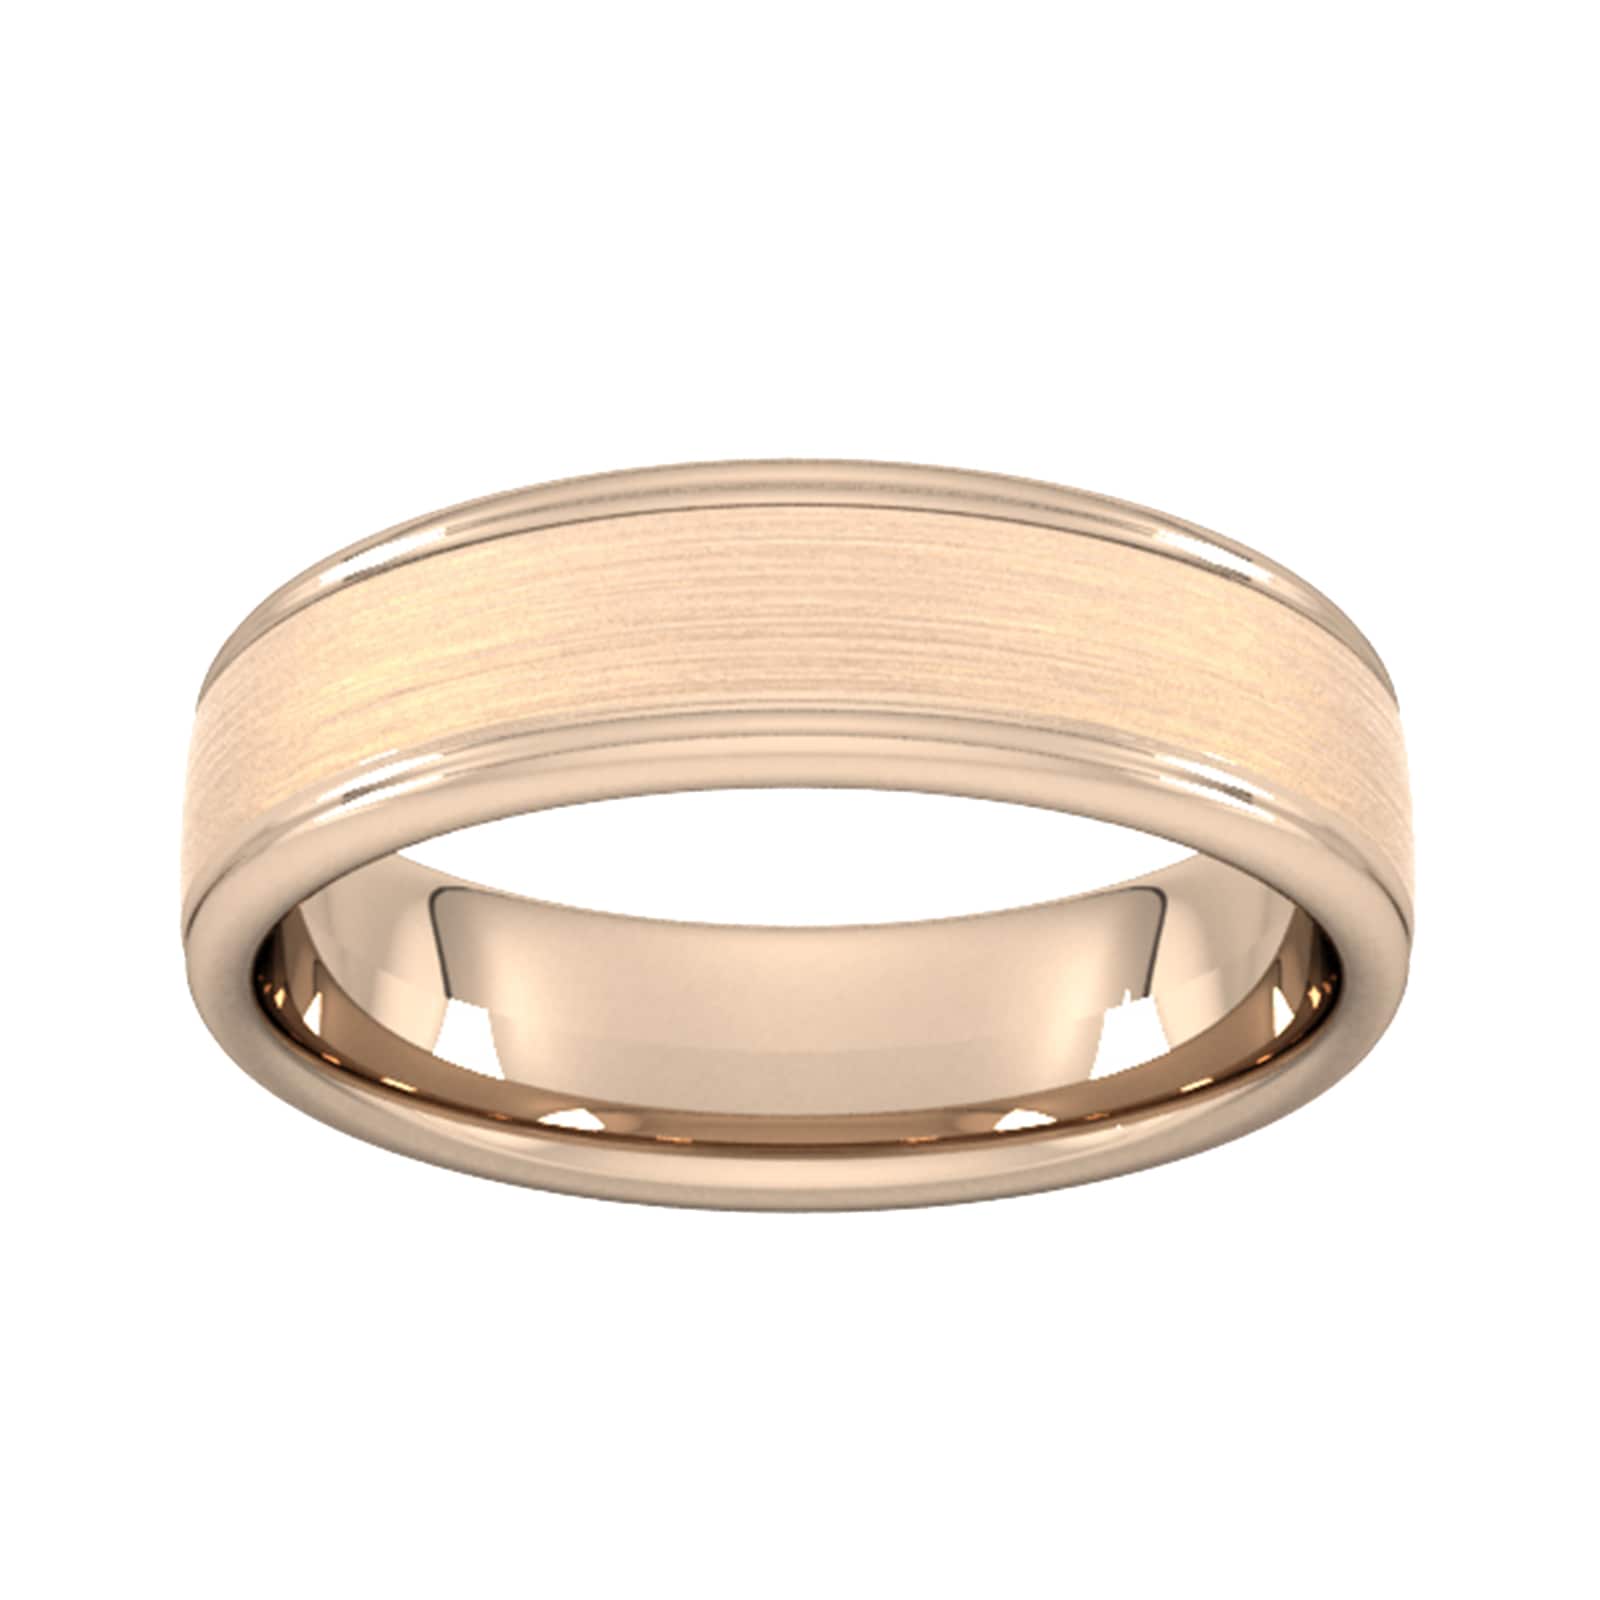 5mm Traditional Court Standard Matt Centre With Grooves Wedding Ring In 9 Carat Rose Gold - Ring Size X